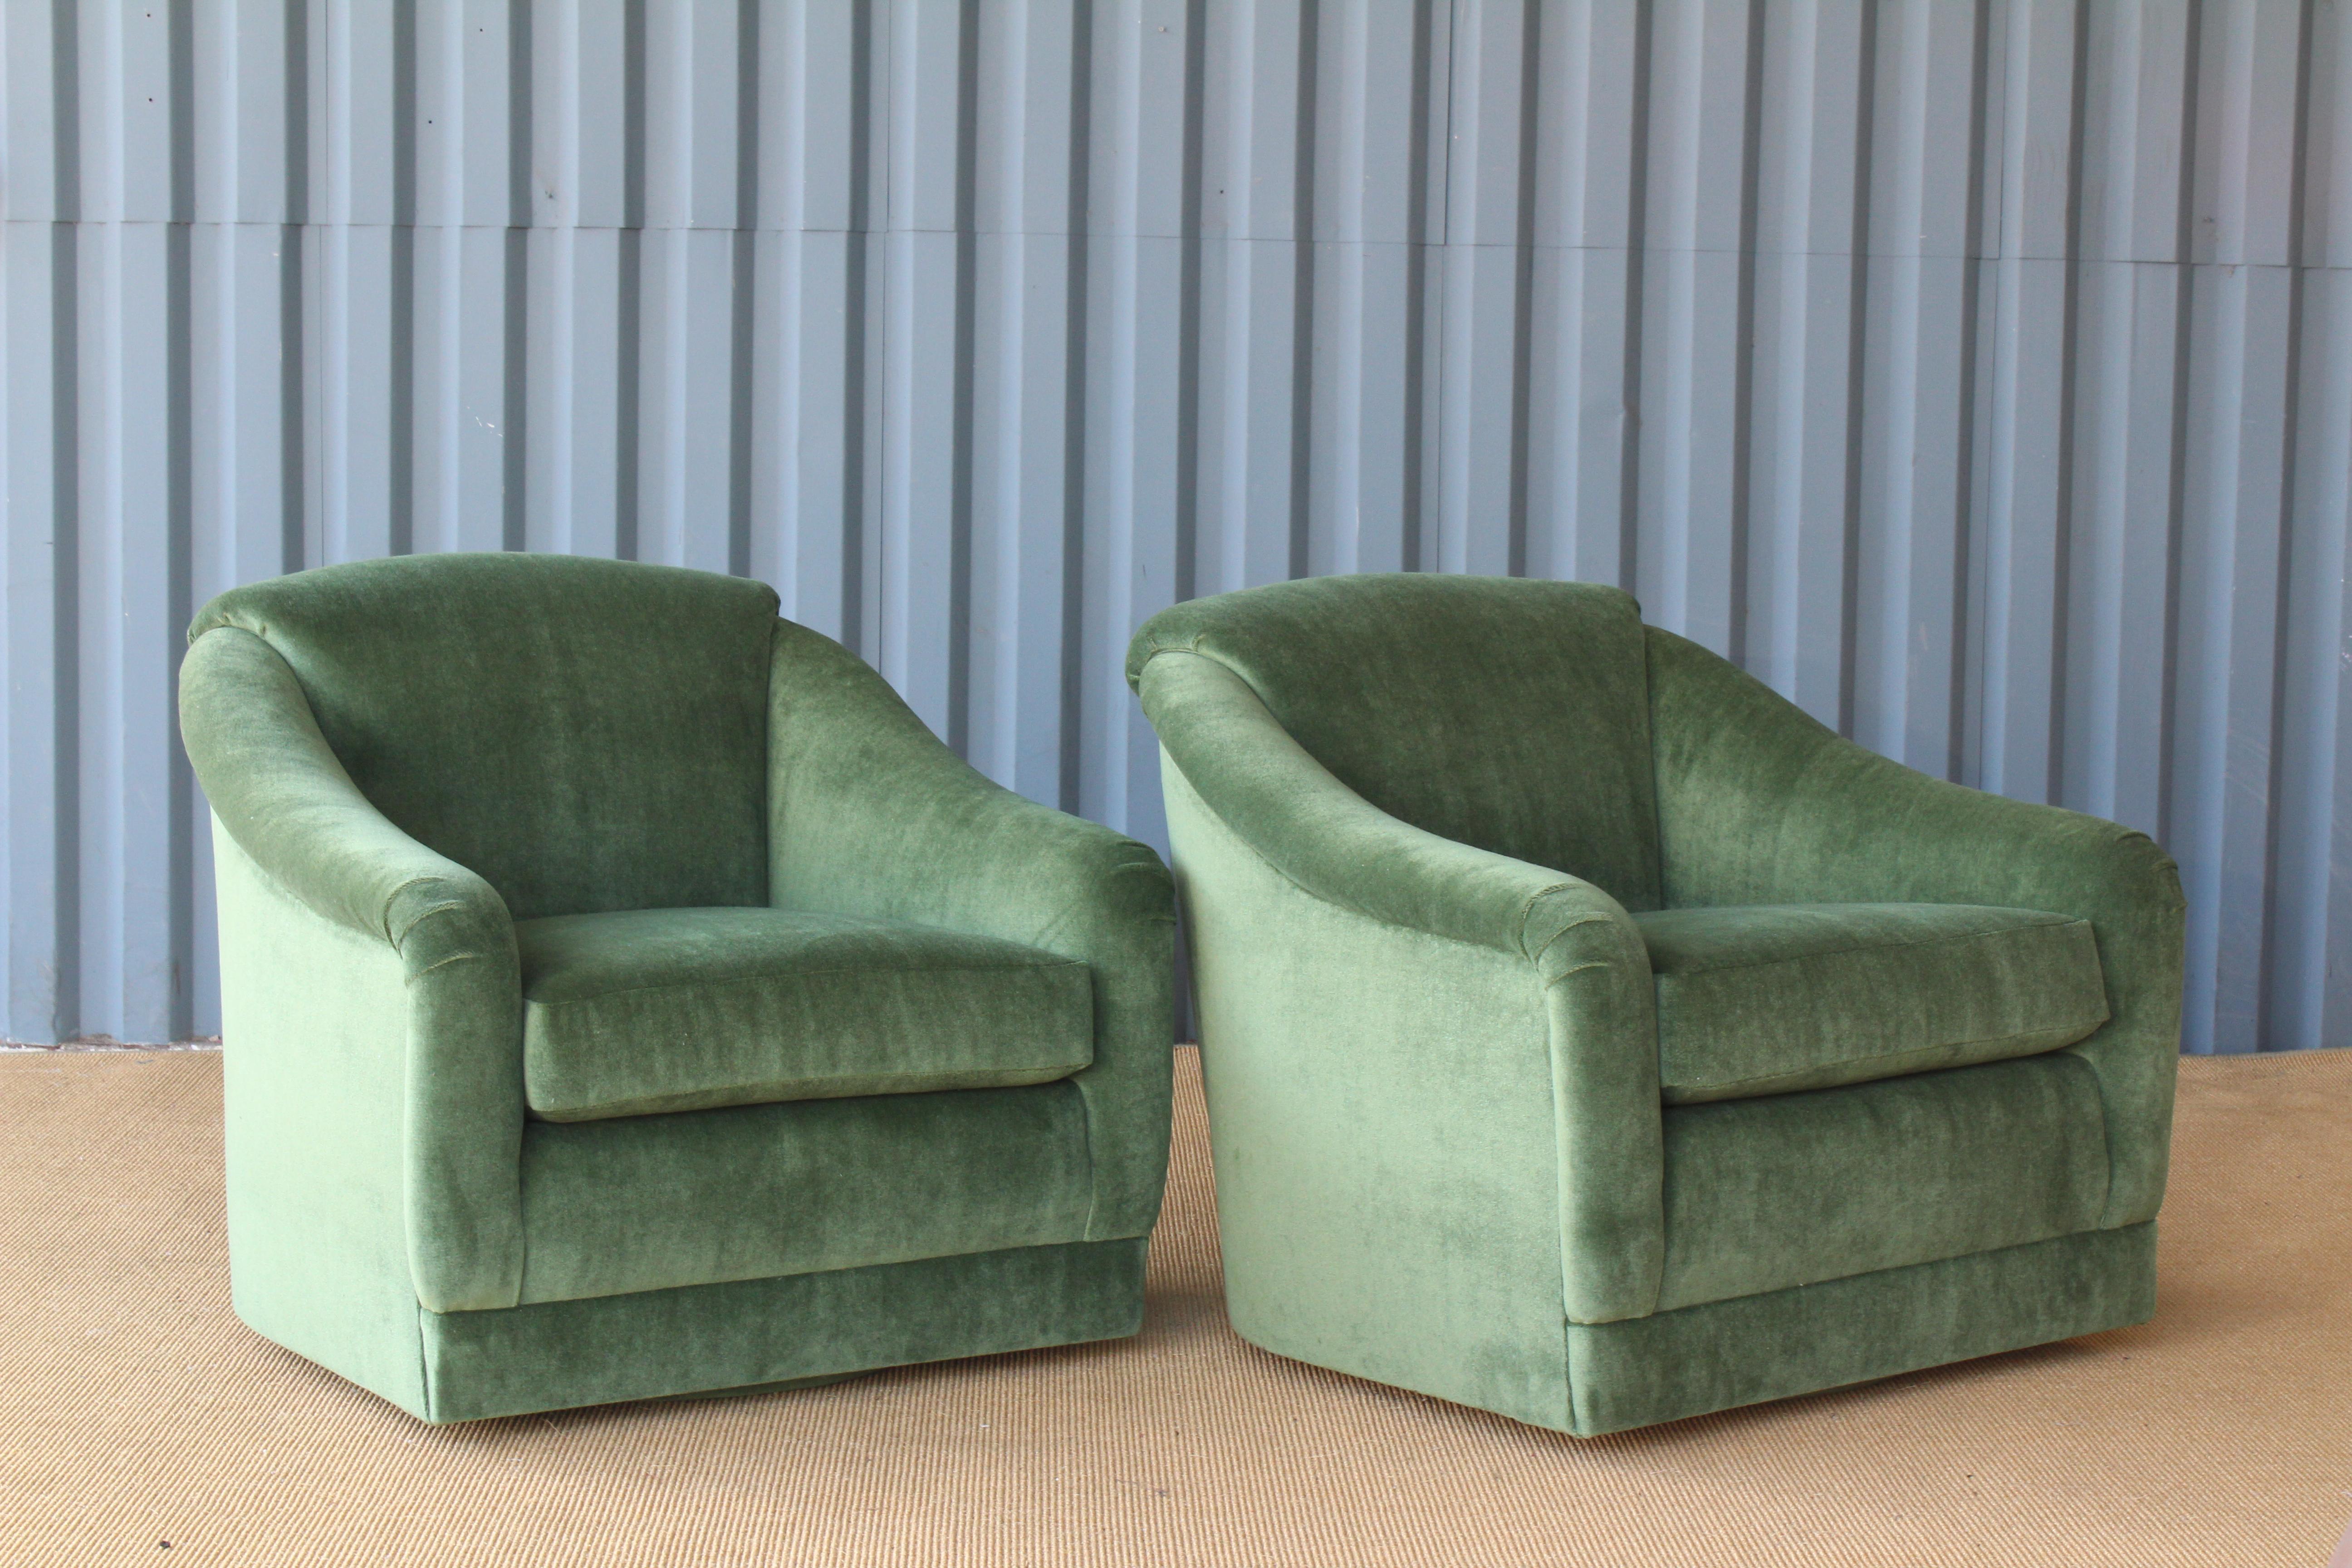 Pair of 1960s club chairs on a swiveling base. The pair have been reupholstered in green wool blend velvet.